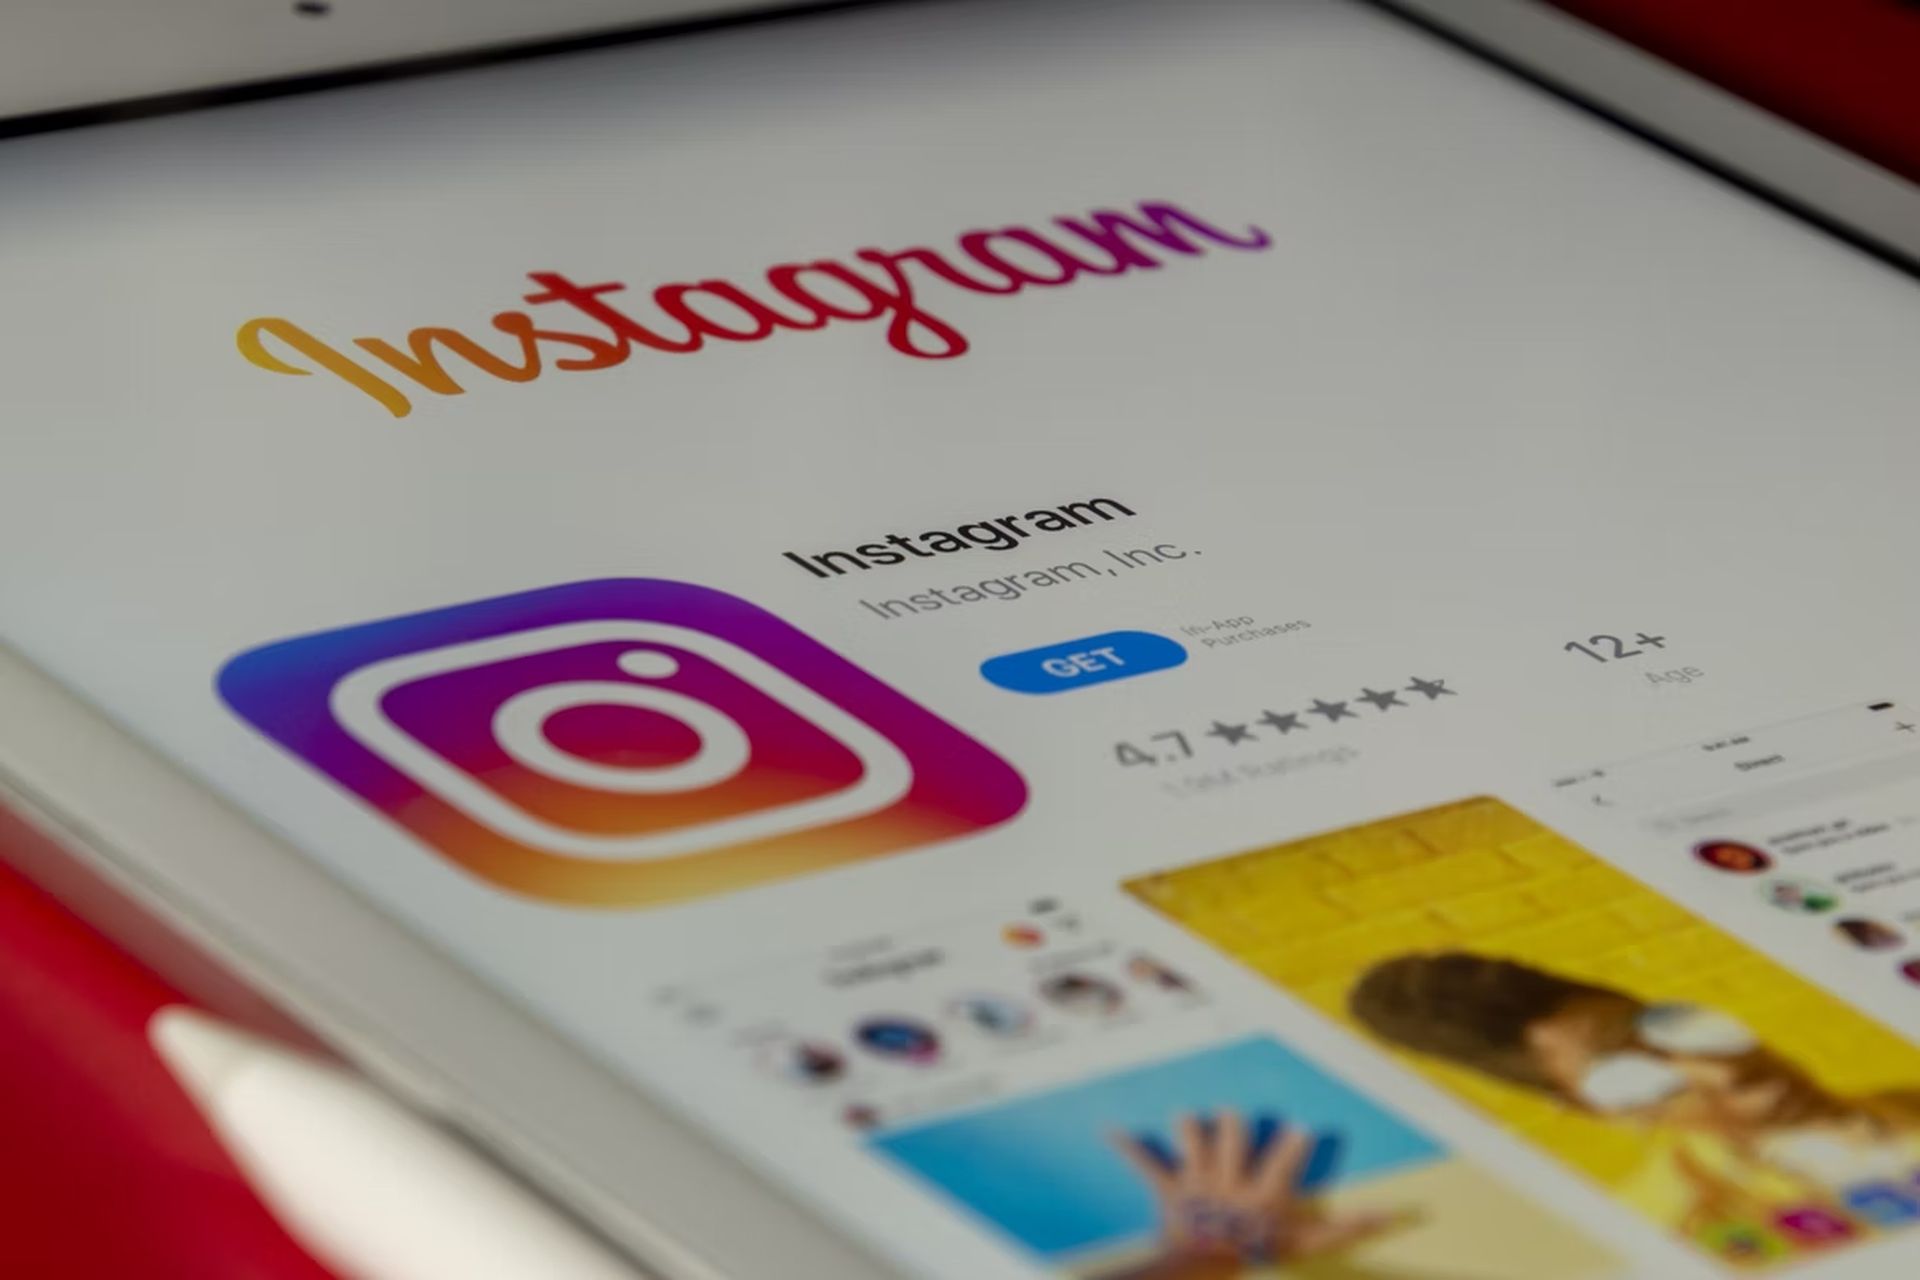 If your Instagram DMs are not working in 2022, here we explain why Instagram DMs are not working and how to fix Instagram DM error.